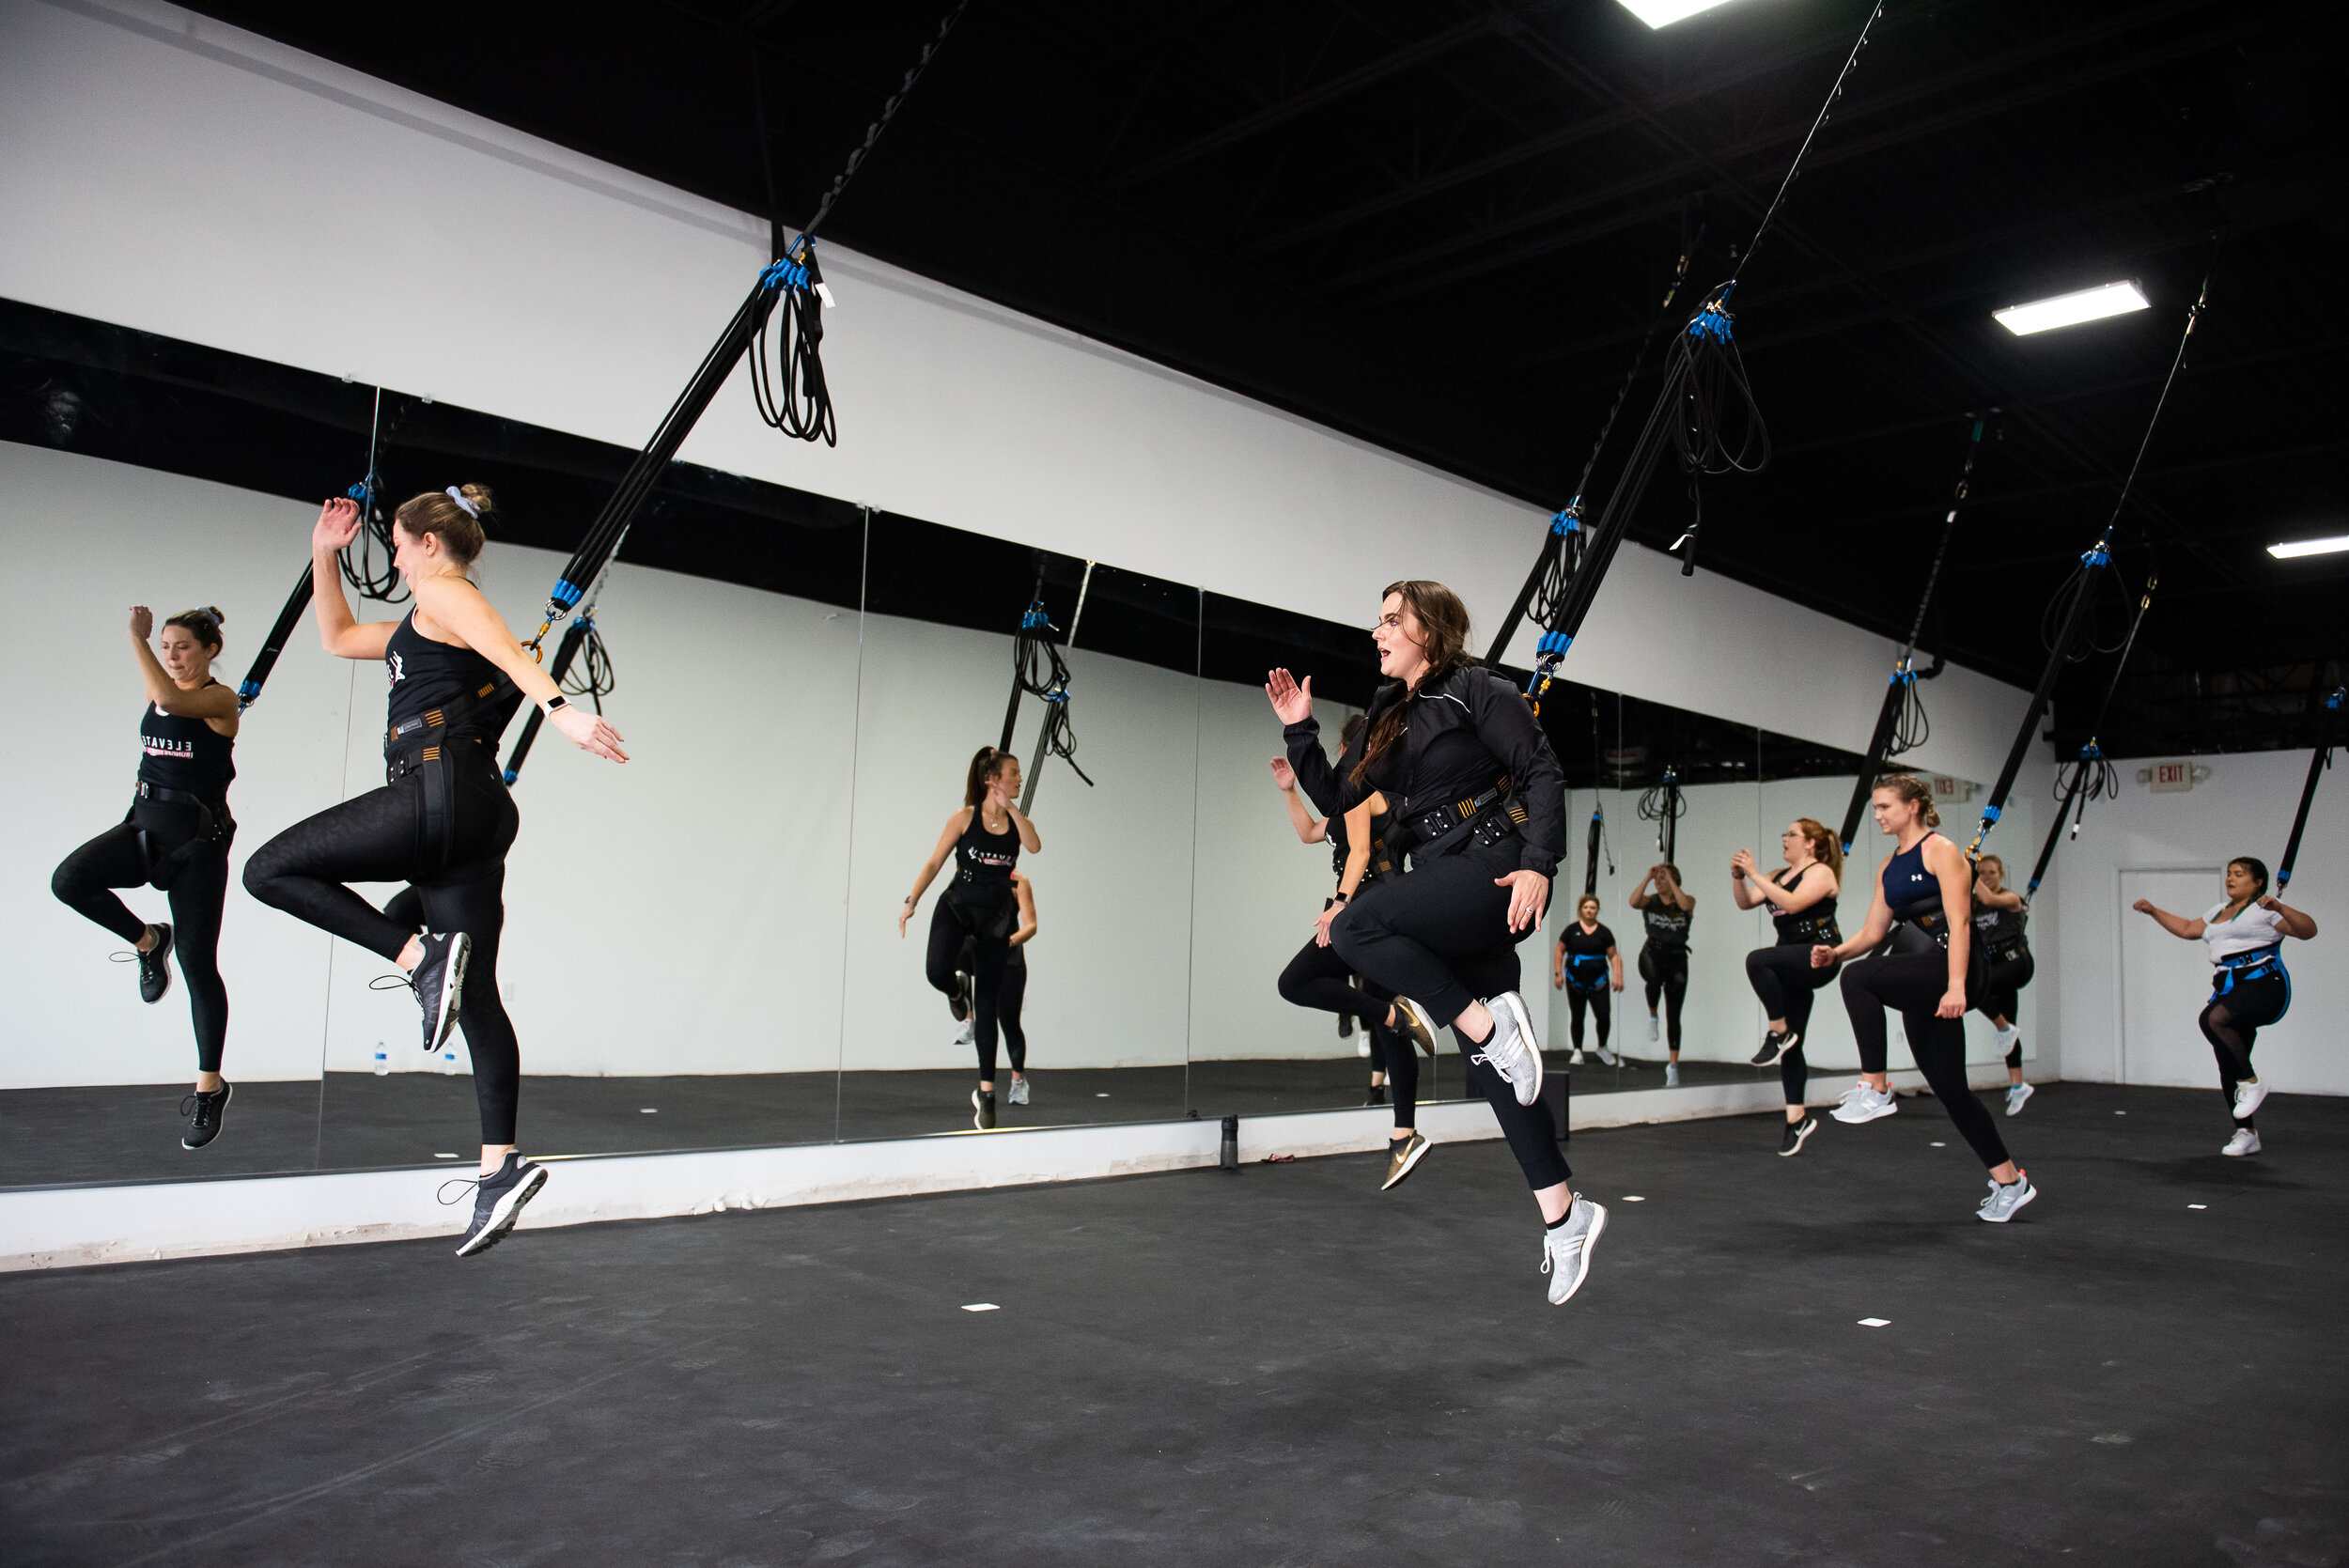 Bungee Fitness: Fly high with this new workout that has people